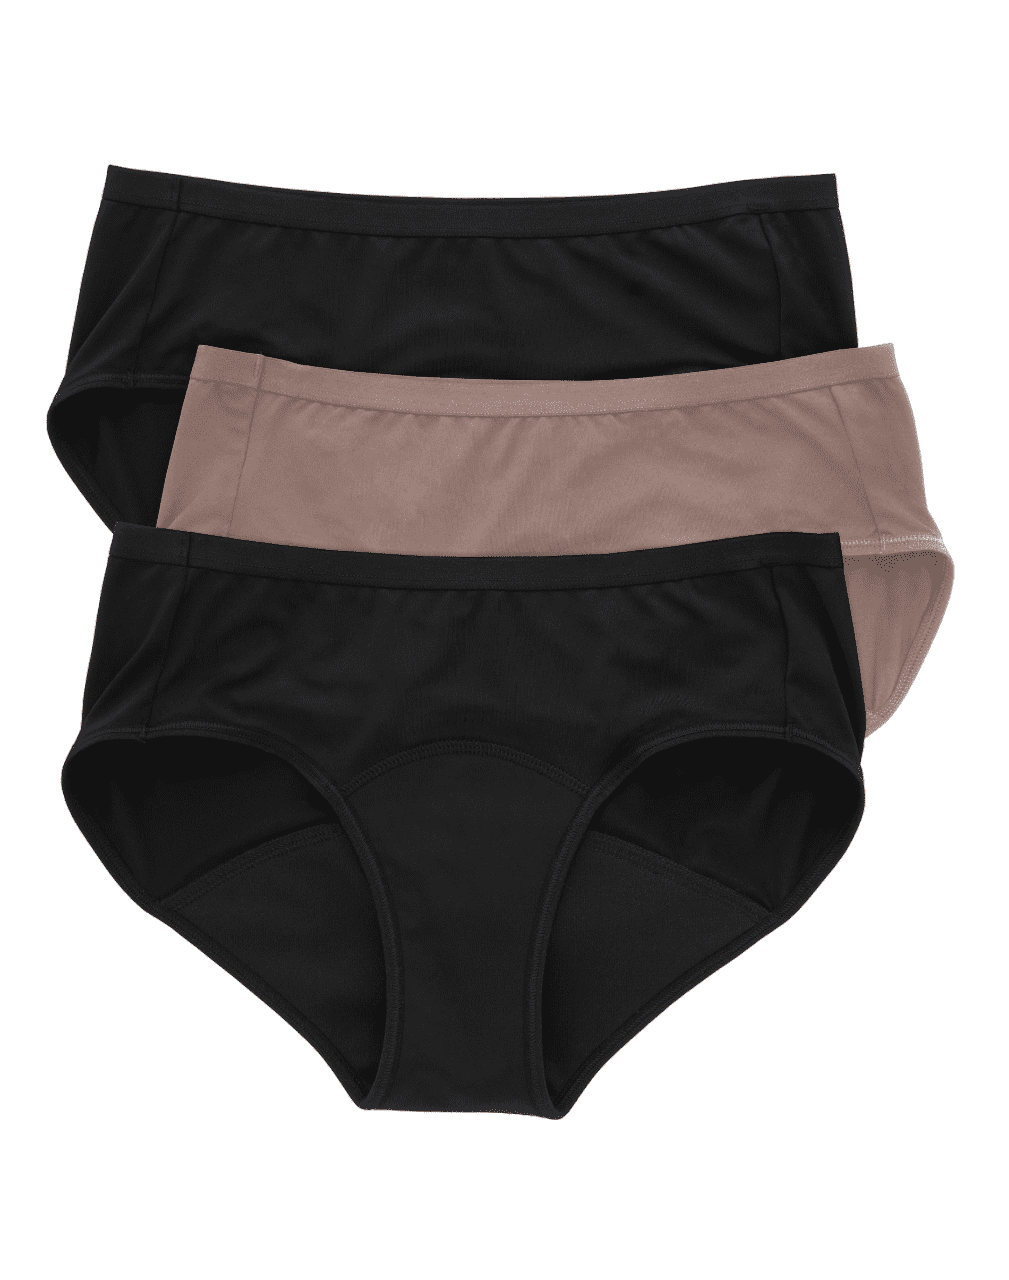 Hanes Womens Comfort, Period. Moderate Protection Hipster Period Underwear 3-Pack